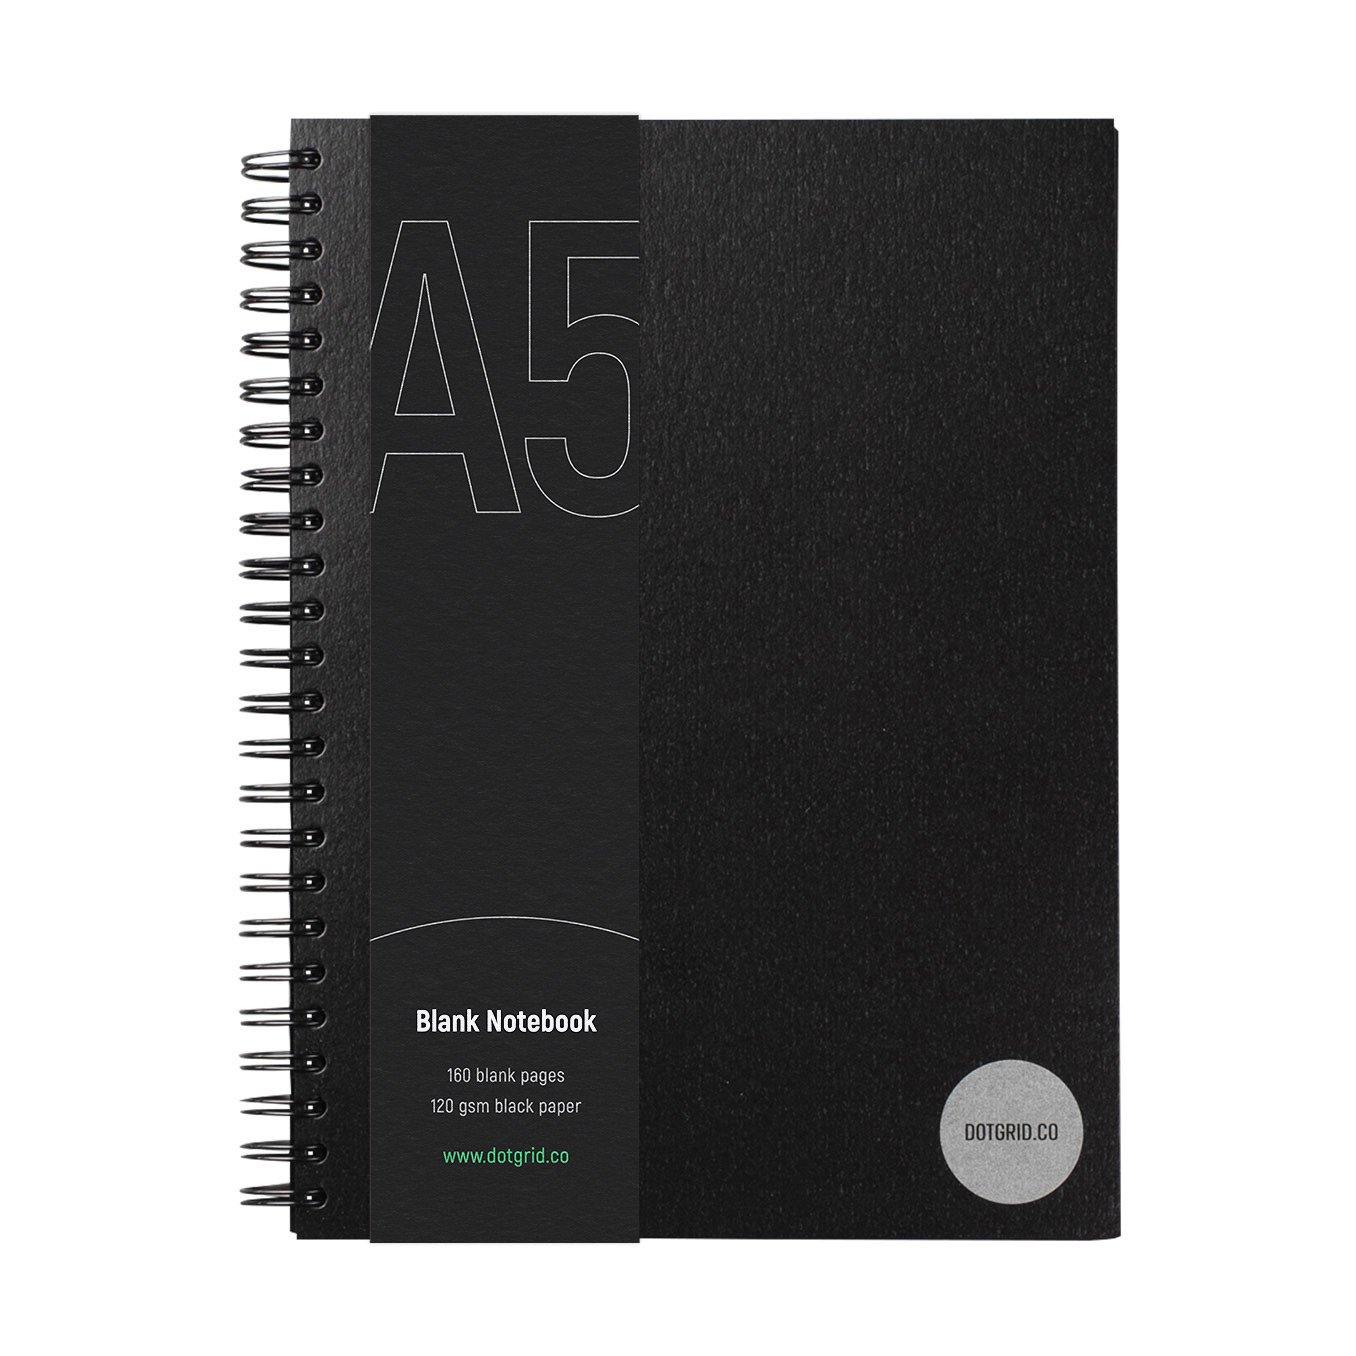 A5 Blank Notebook - Black Pages - Dotgrid